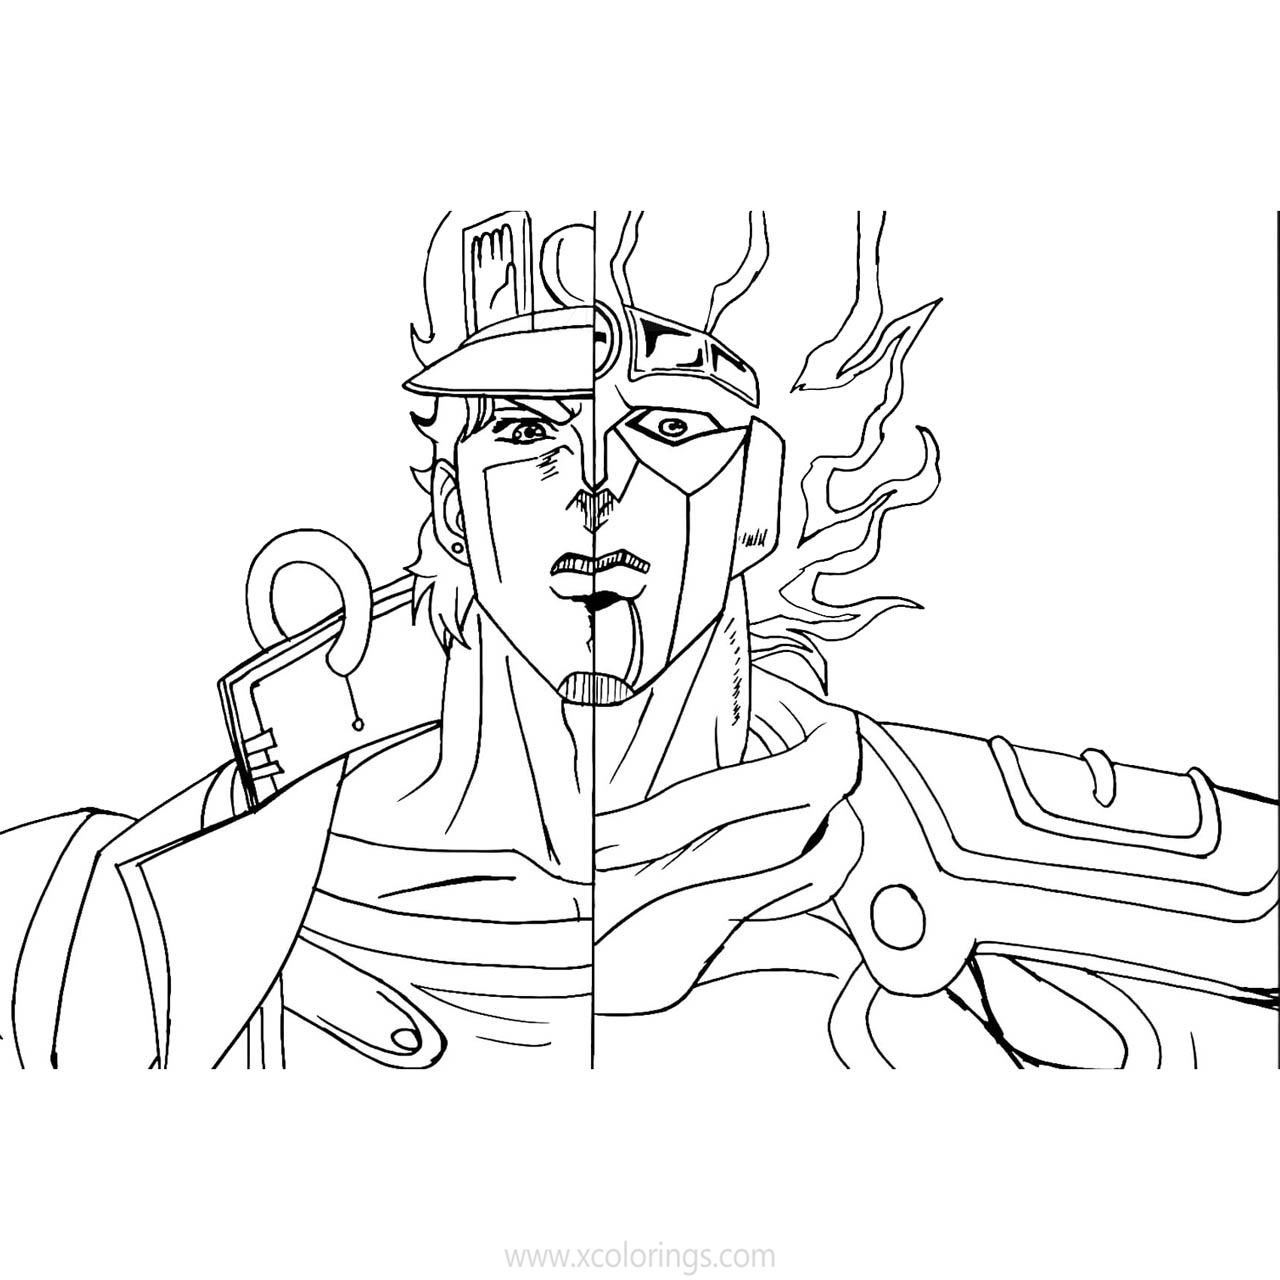 Free Jotaro and Star Platinum from JoJo's Bizarre Adventure Coloring Pages printable